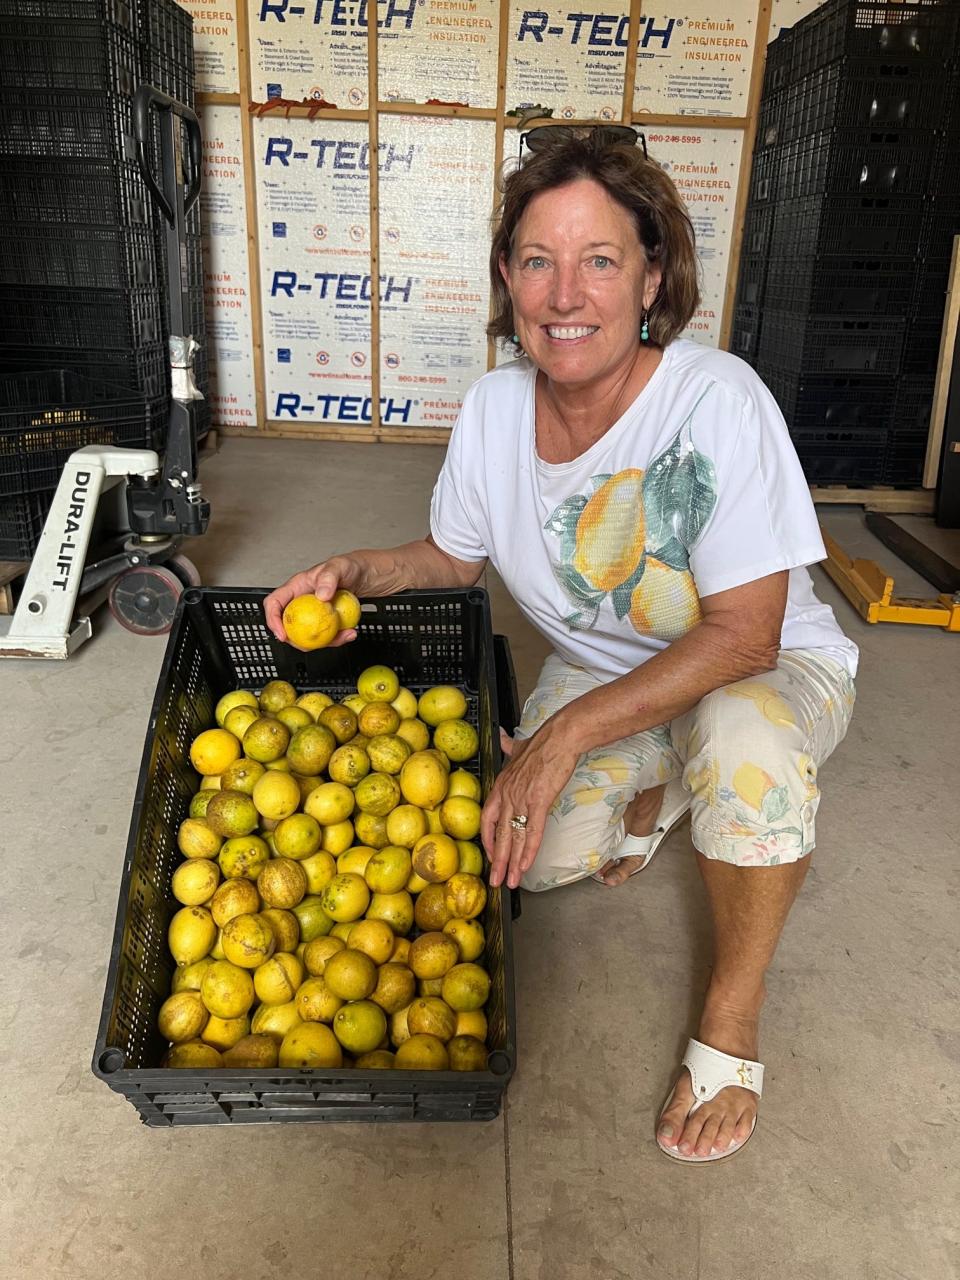 Martha Roe Burke and her husband ship most of their fruit to subscription customers in Canada after growing it as close to organically as they can.